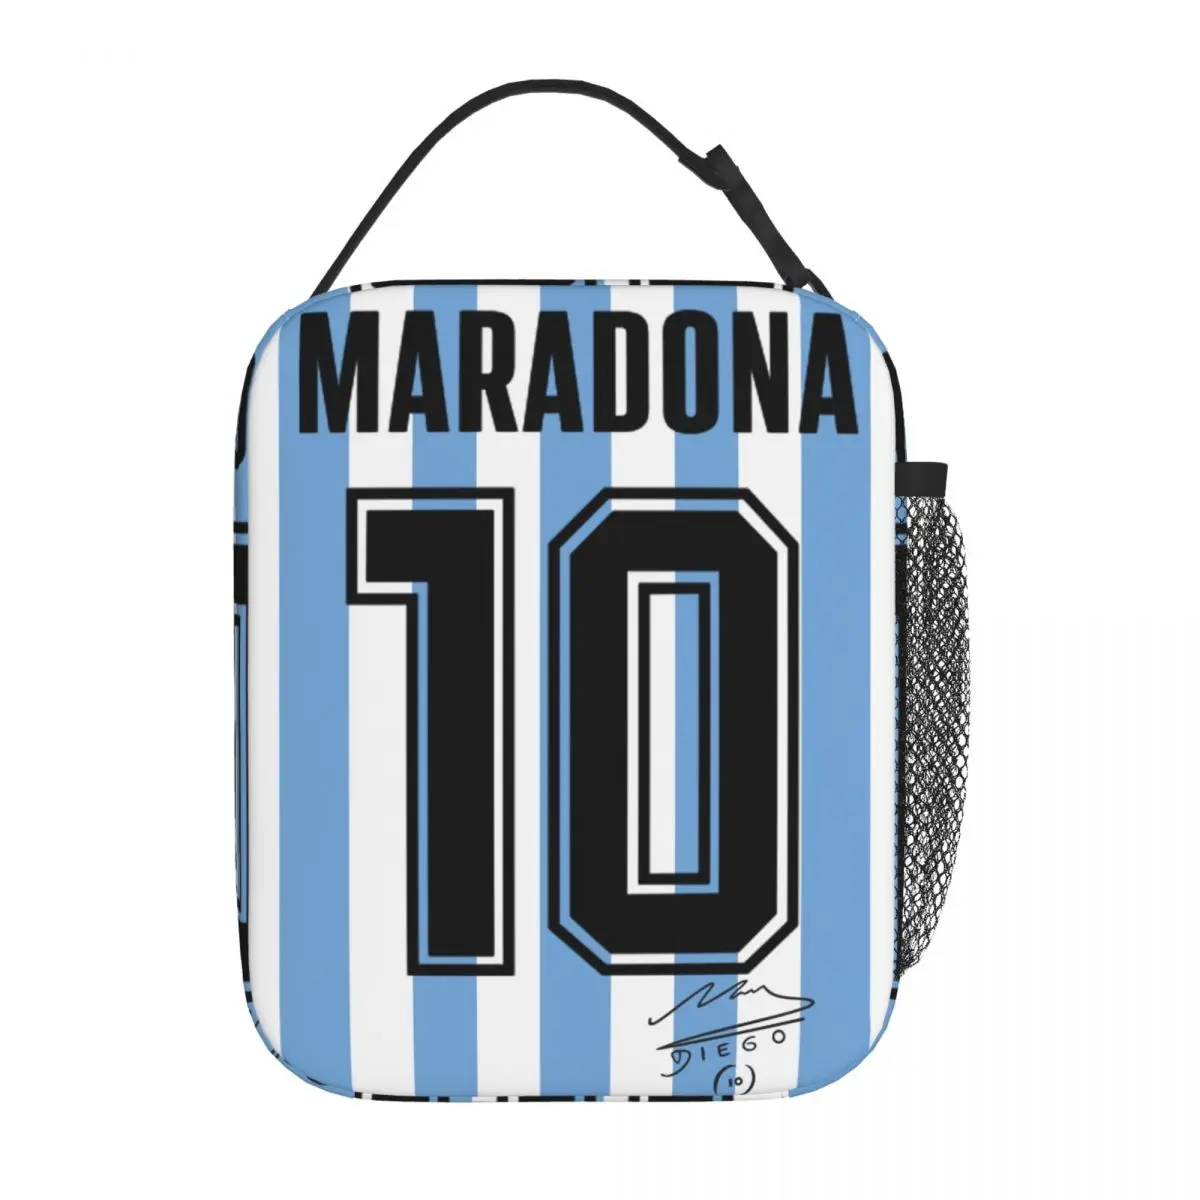 

Diego Maradona 10 Product Insulated Lunch Bag School Food Box Reusable New Arrival Cooler Thermal Bento Box